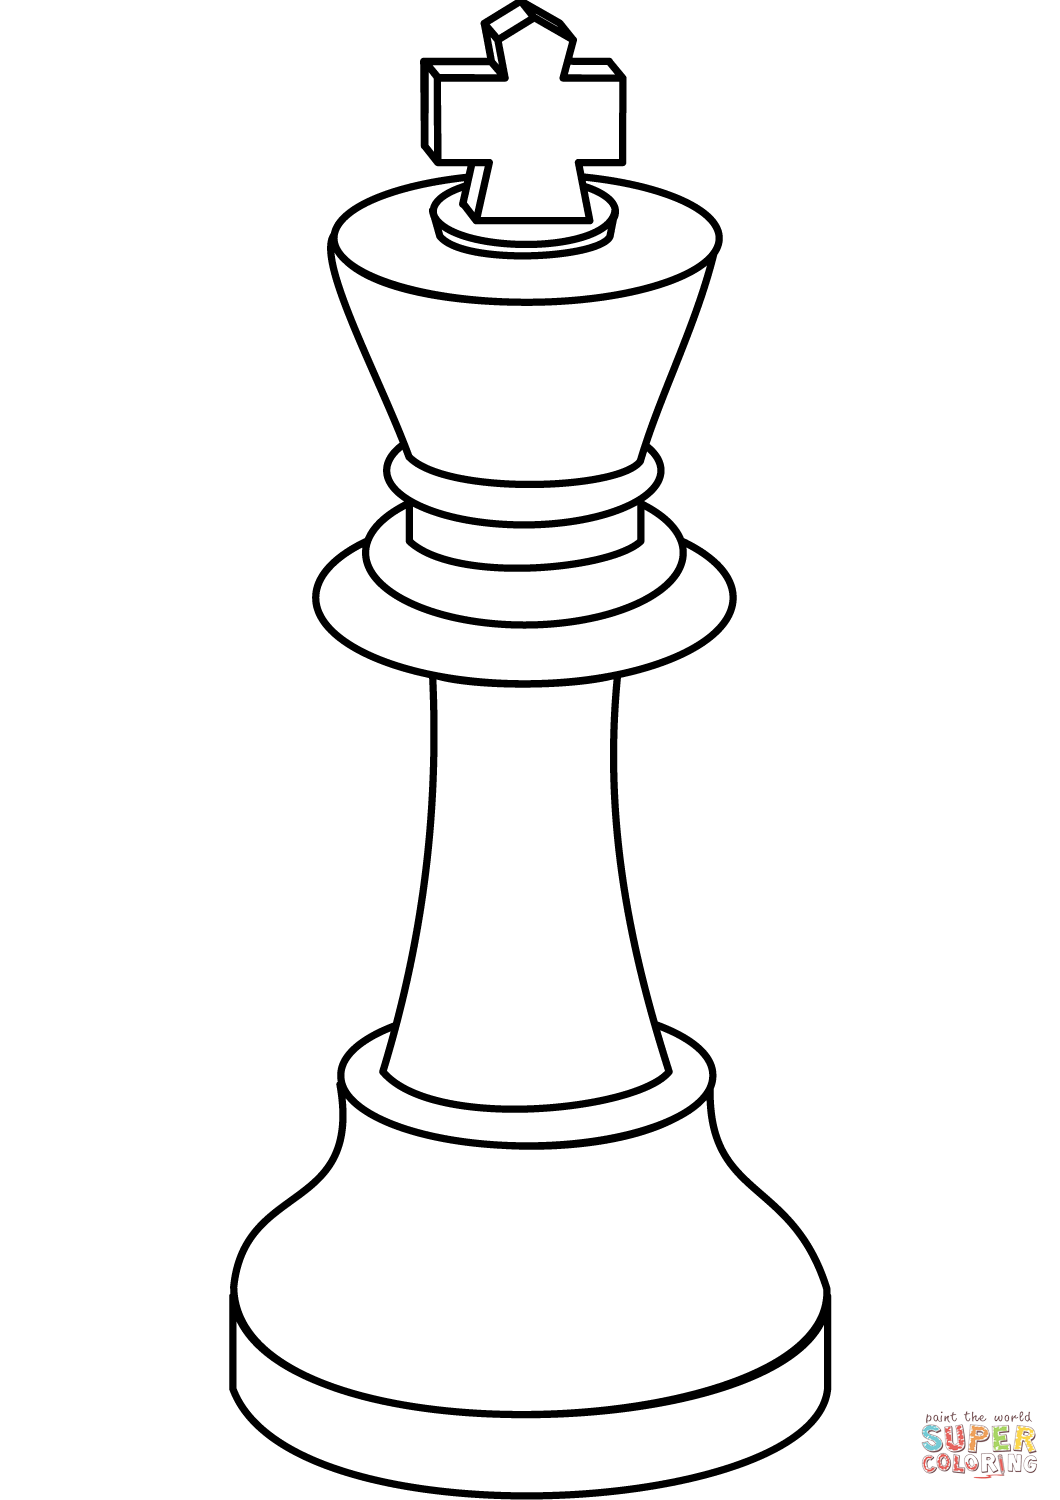 Chess king coloring page free printable coloring pages